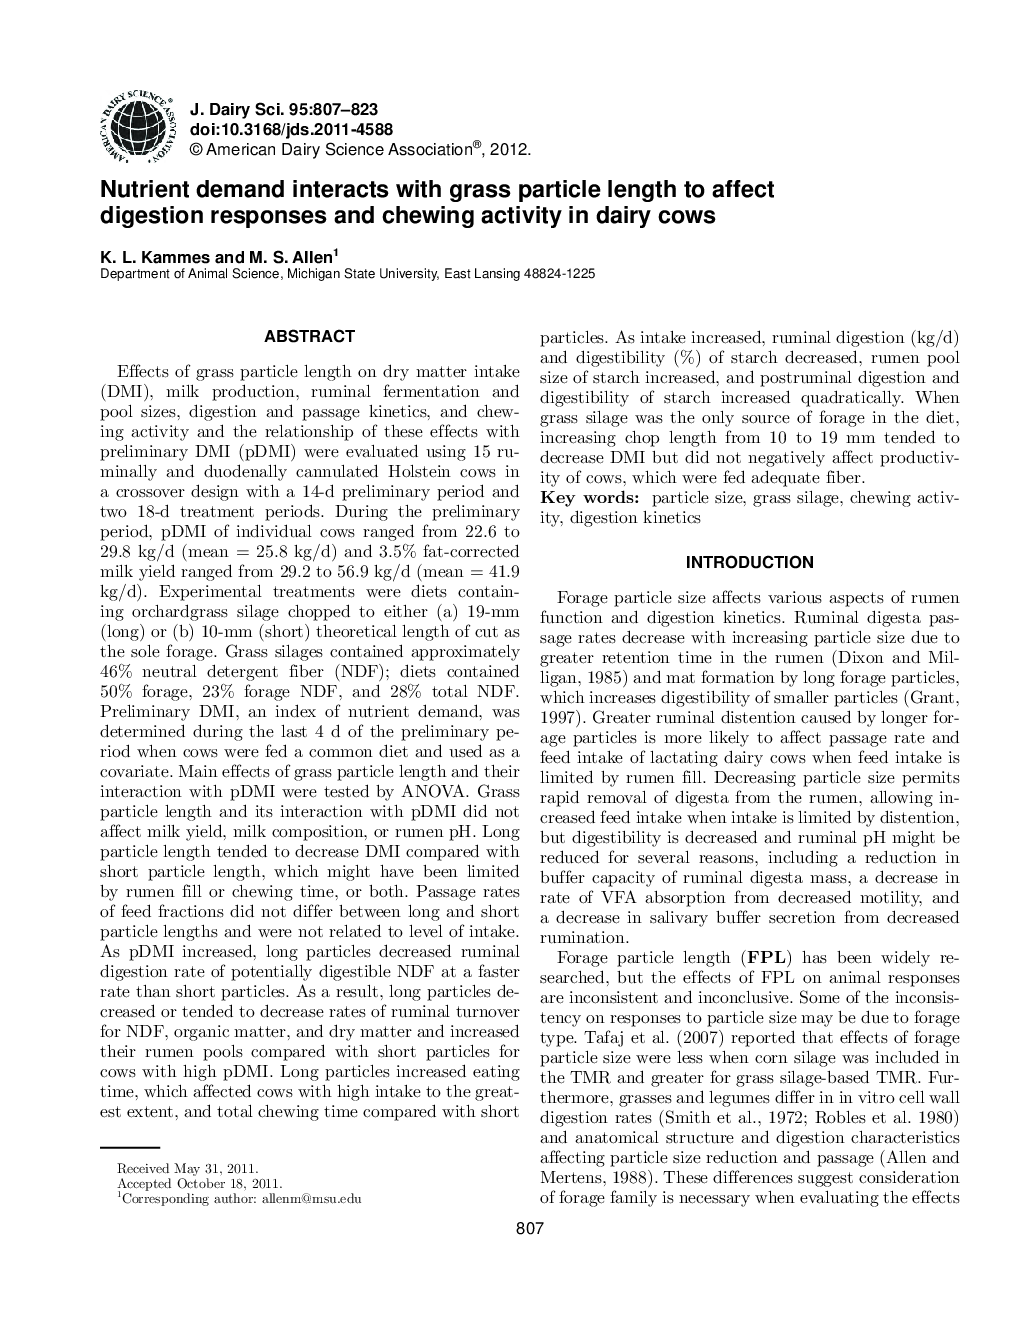 Nutrient demand interacts with grass particle length to affect digestion responses and chewing activity in dairy cows